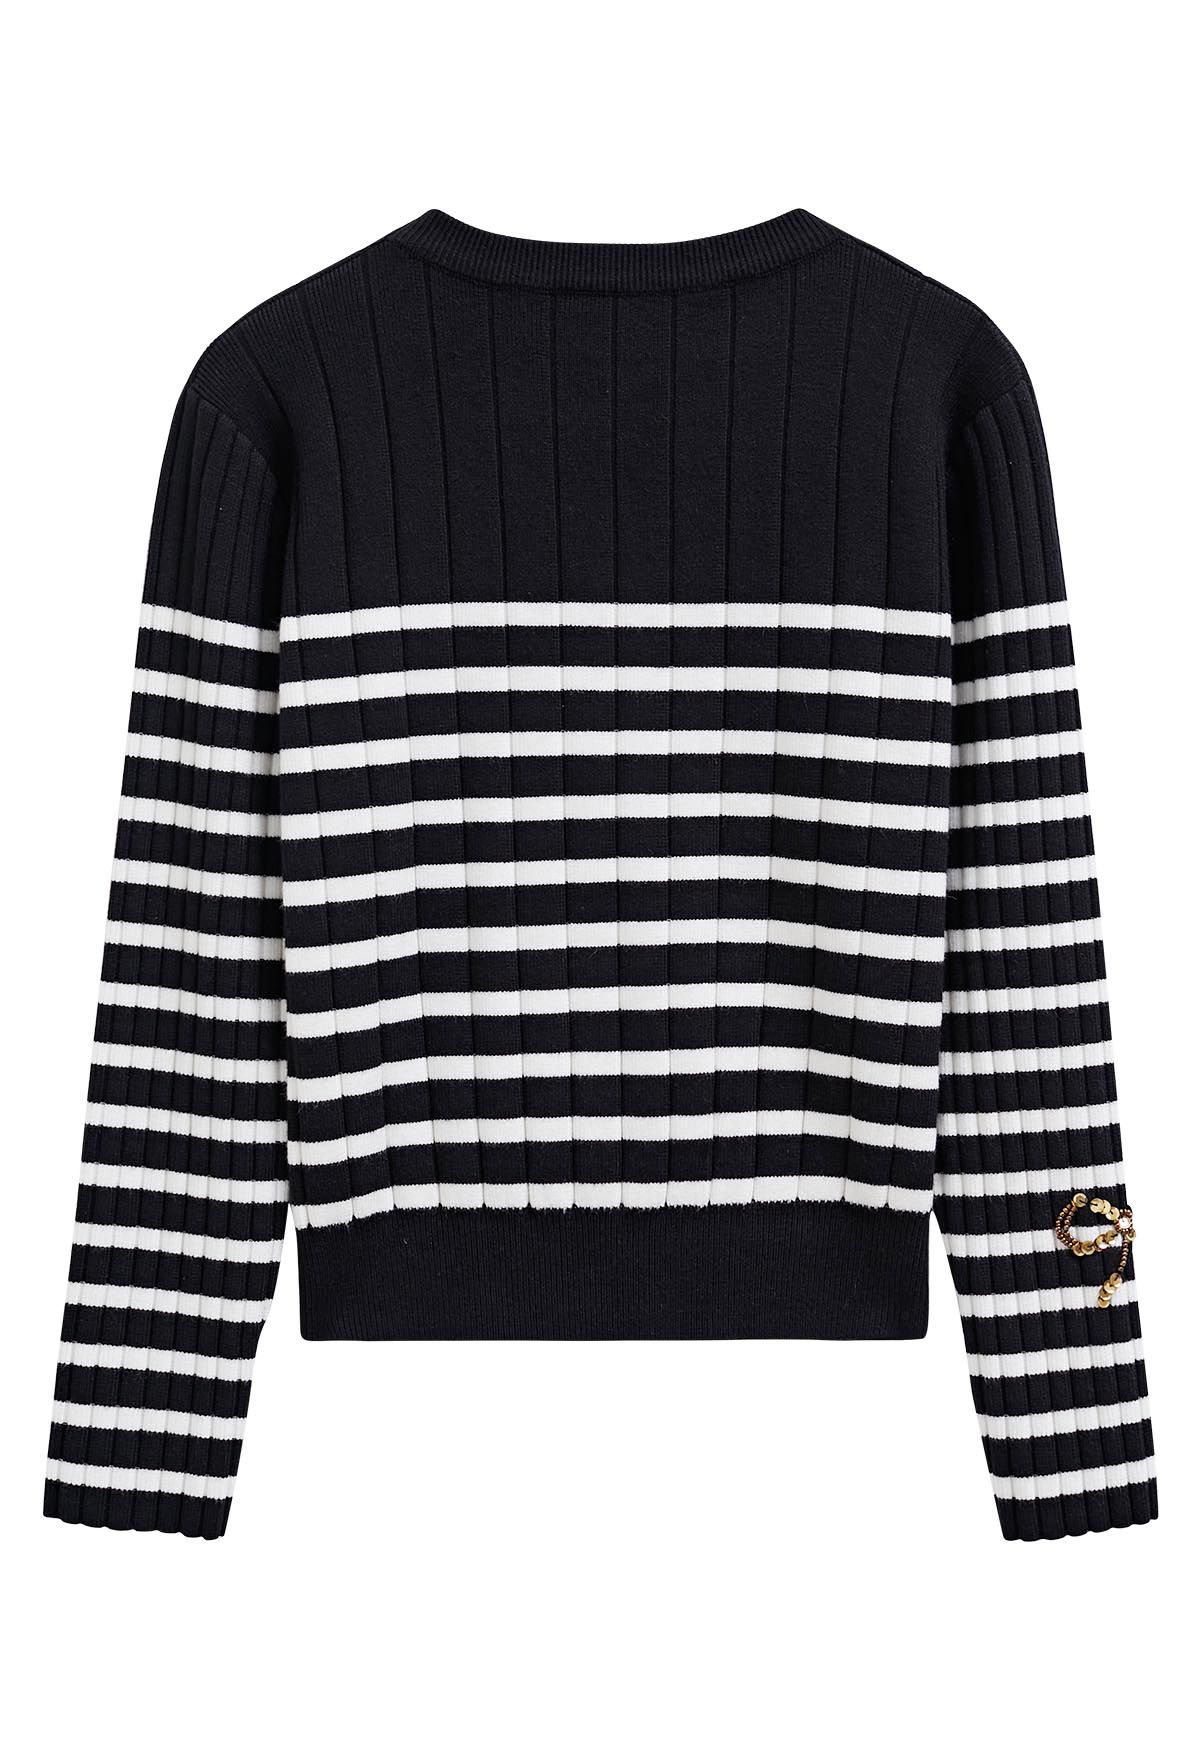 Sequin Beaded Bowknot Striped Knit Sweater in Black